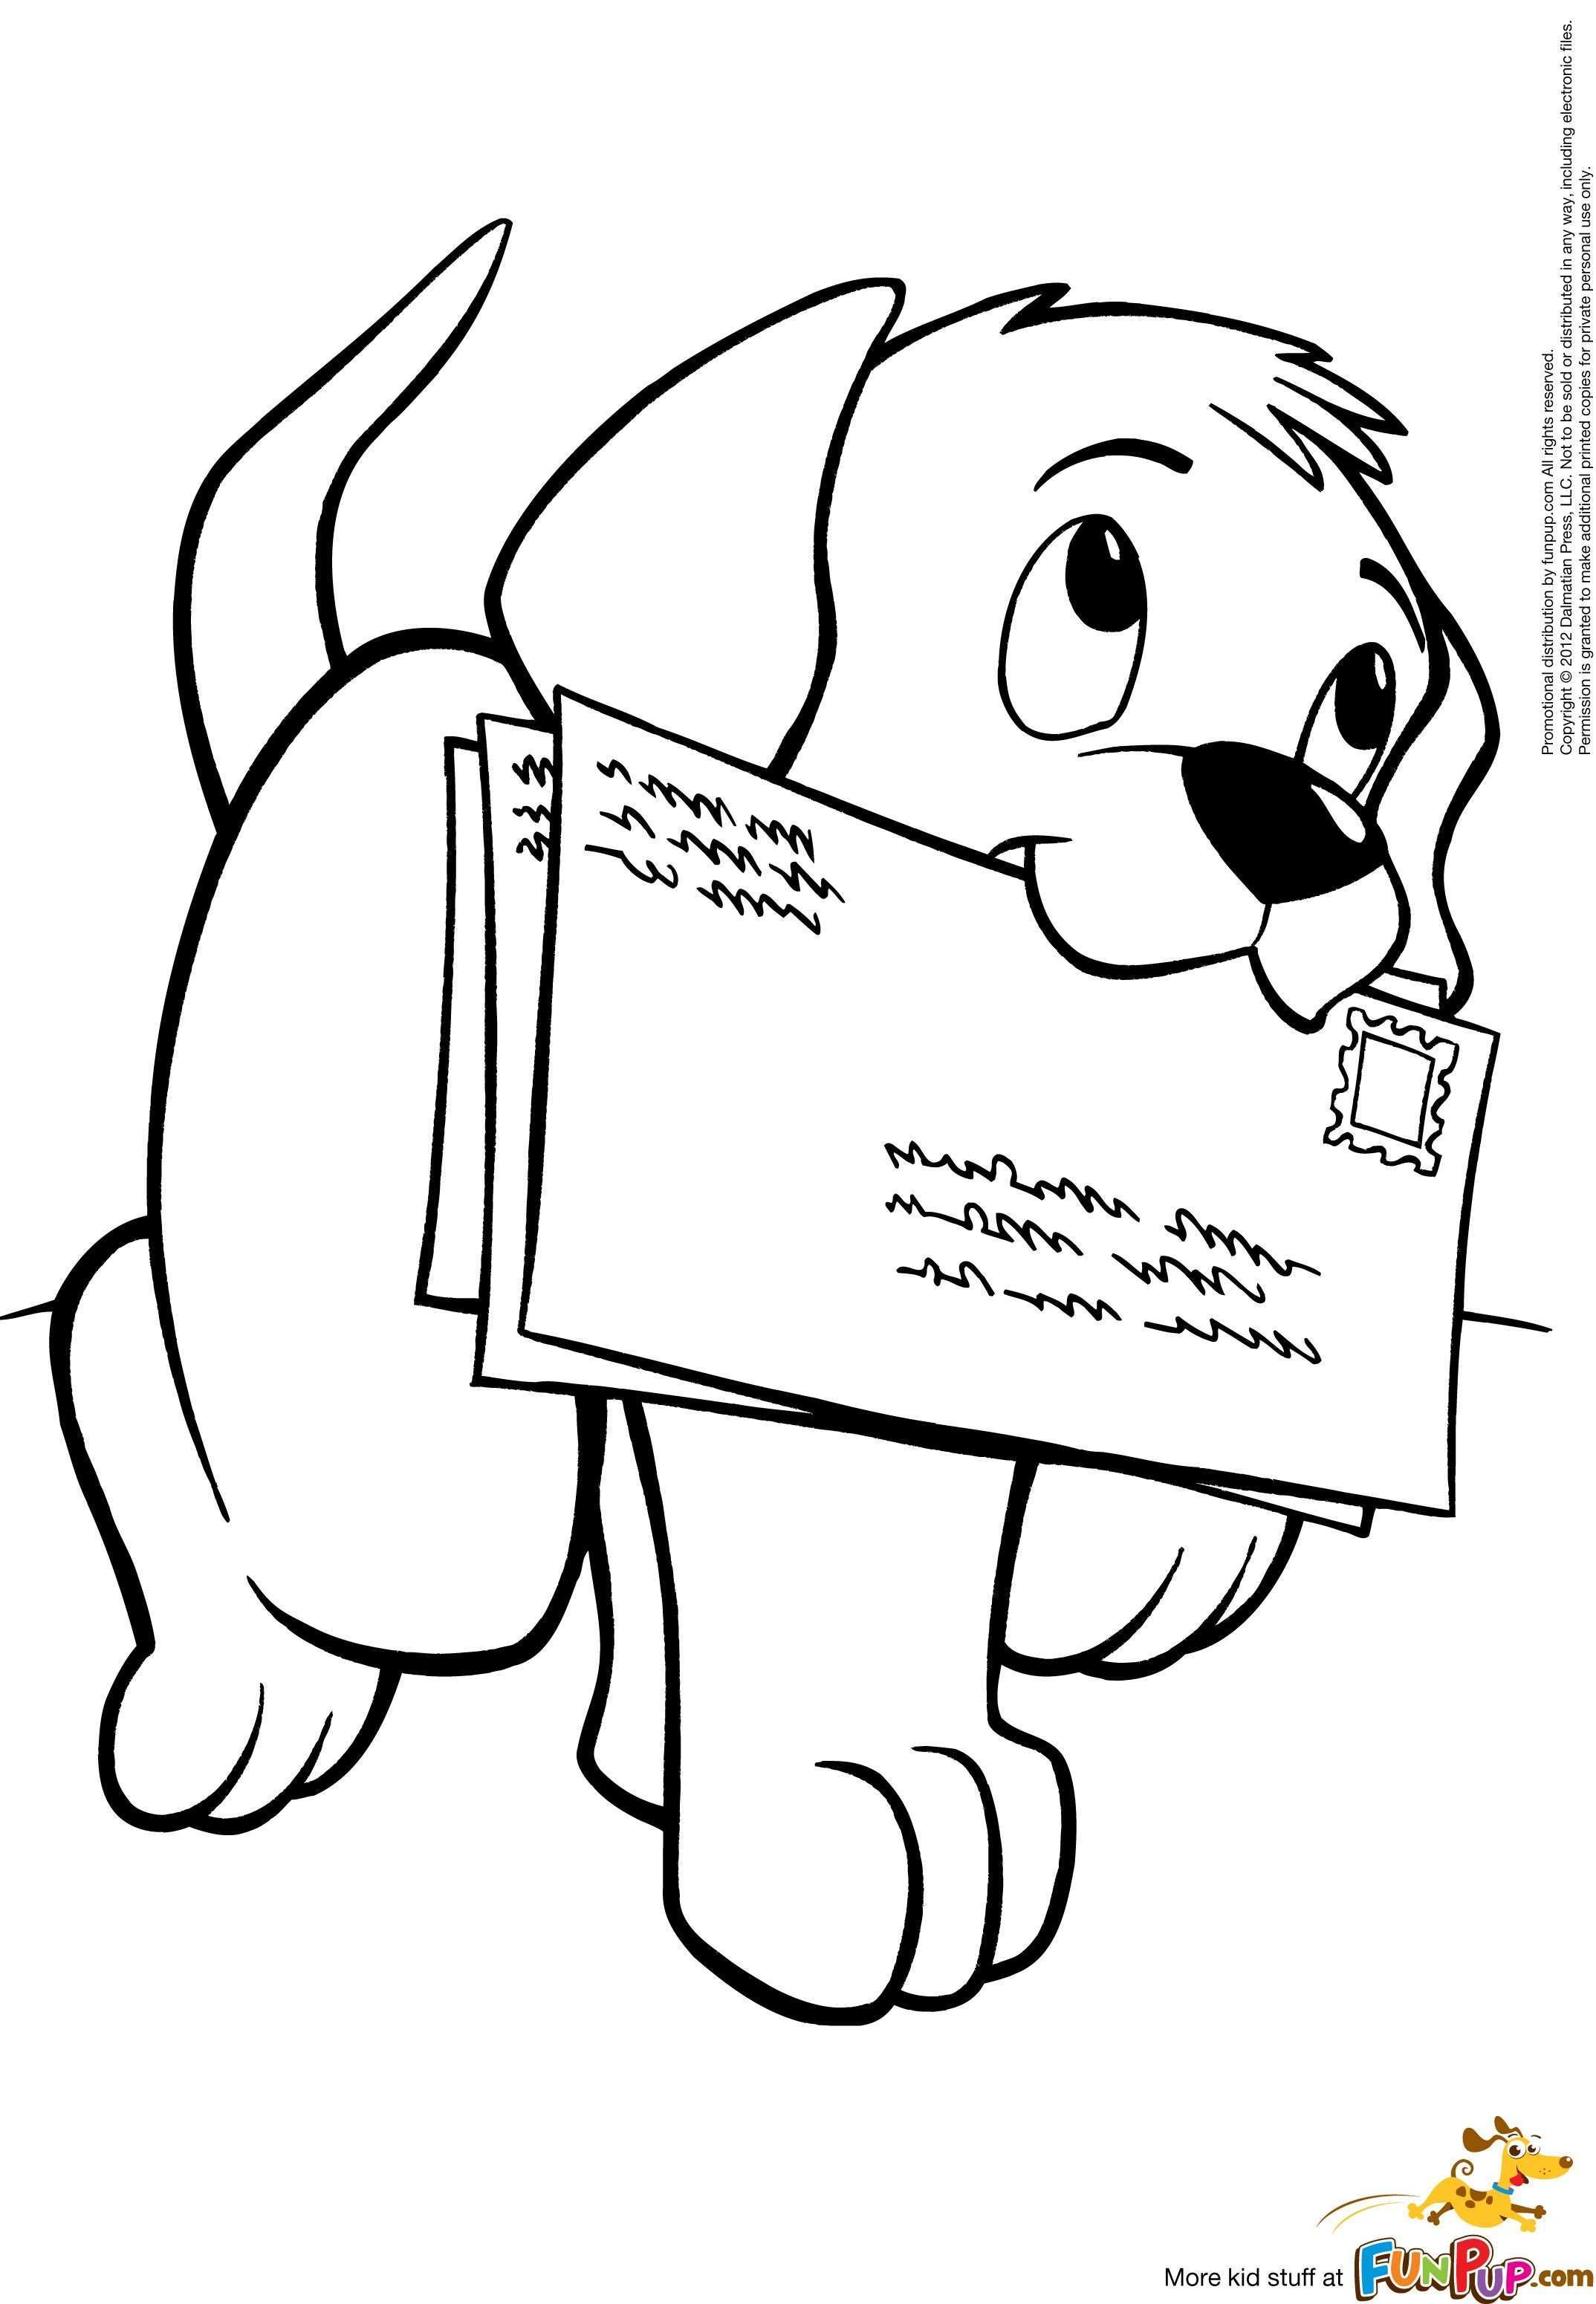 Free Printable Coloring Pages Puppy Coloring Pages Dog Coloring Page Coloring Books